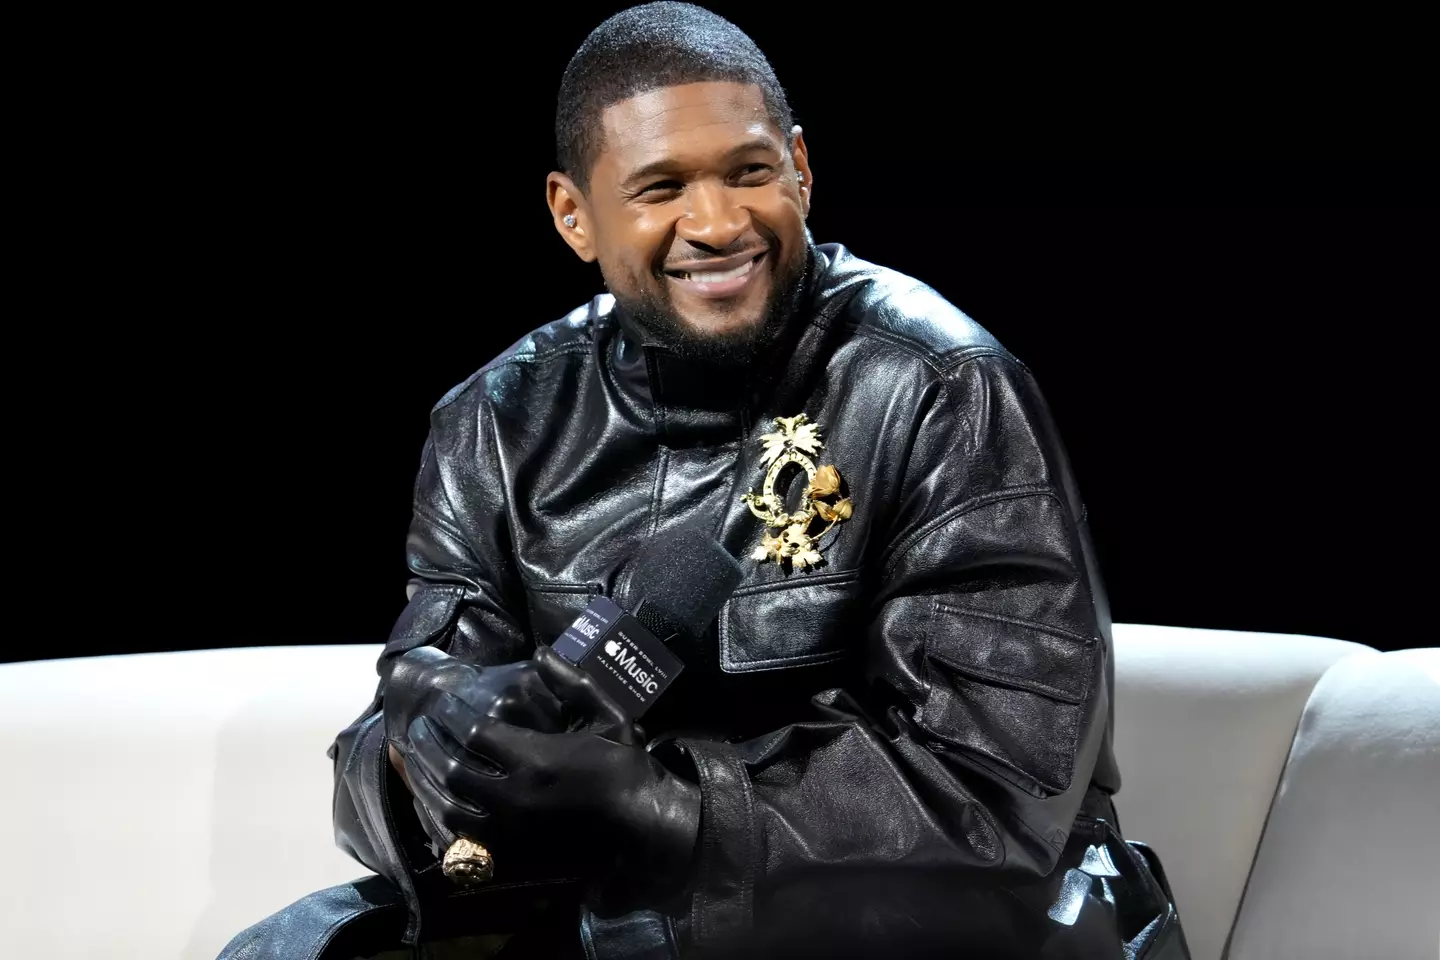 Usher has fans everywhere excited for his NFL halftime show.